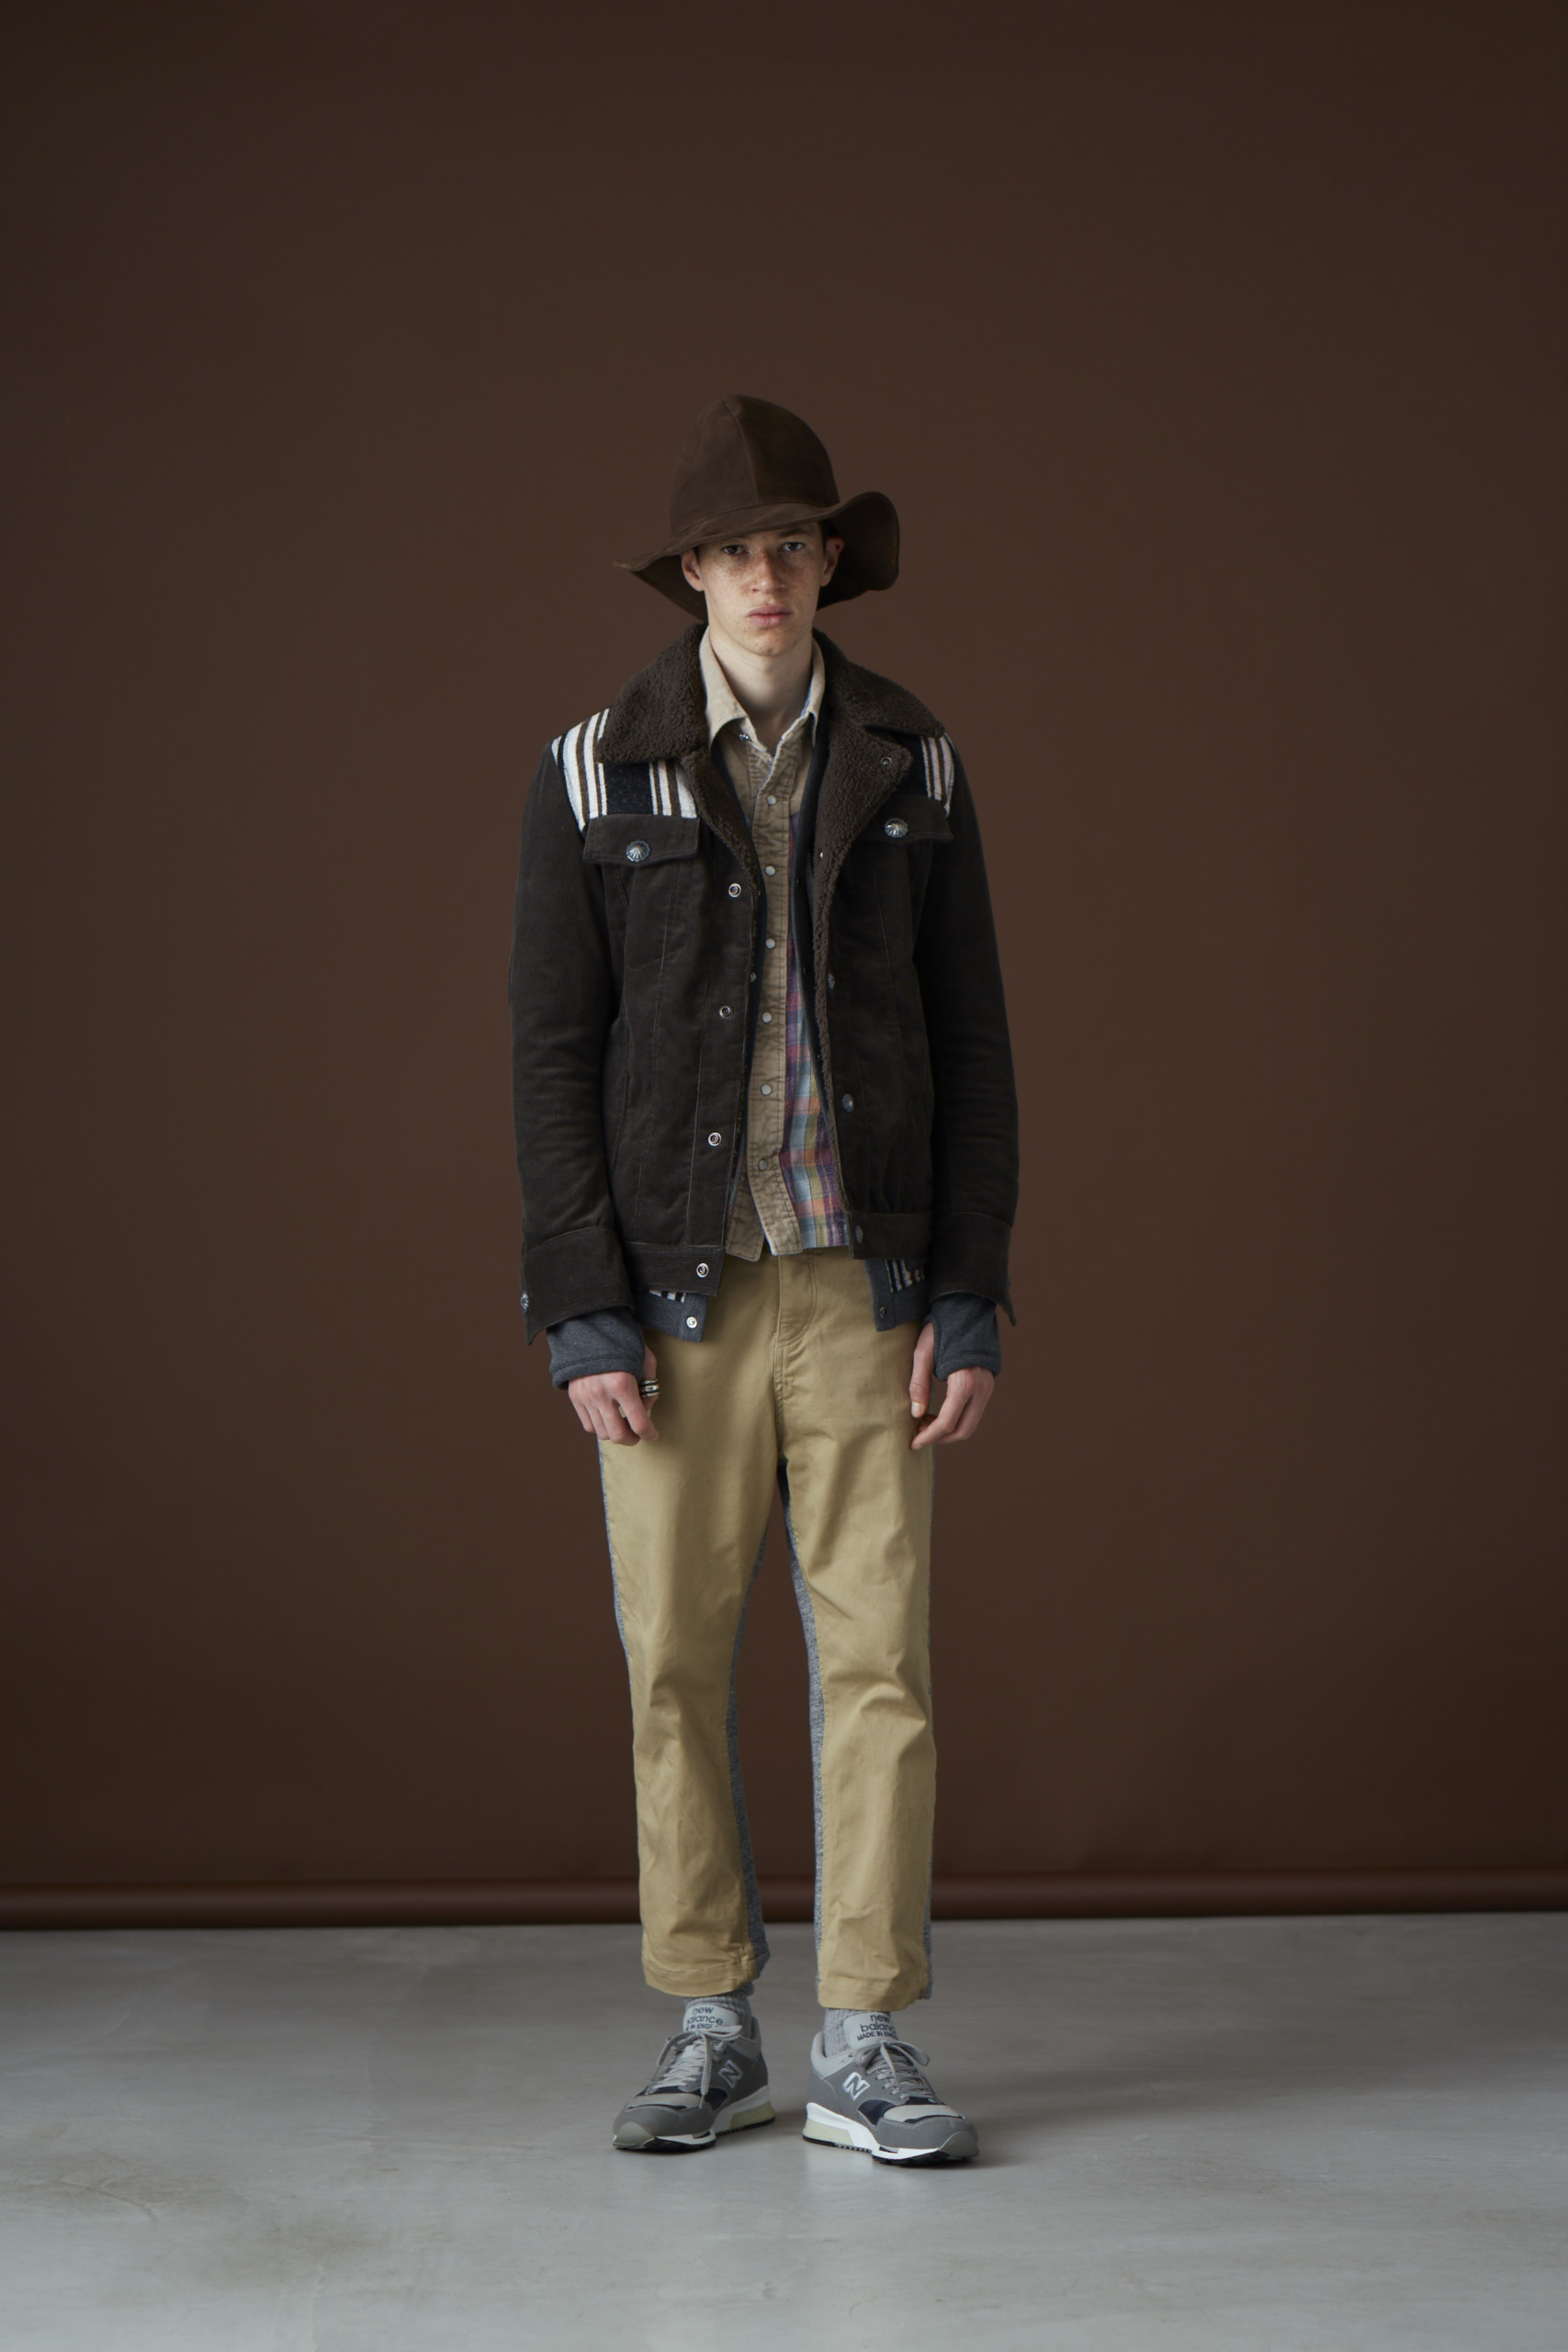 AYUITE-アユイテ 2015-16AW Collection Look | HardiVague information